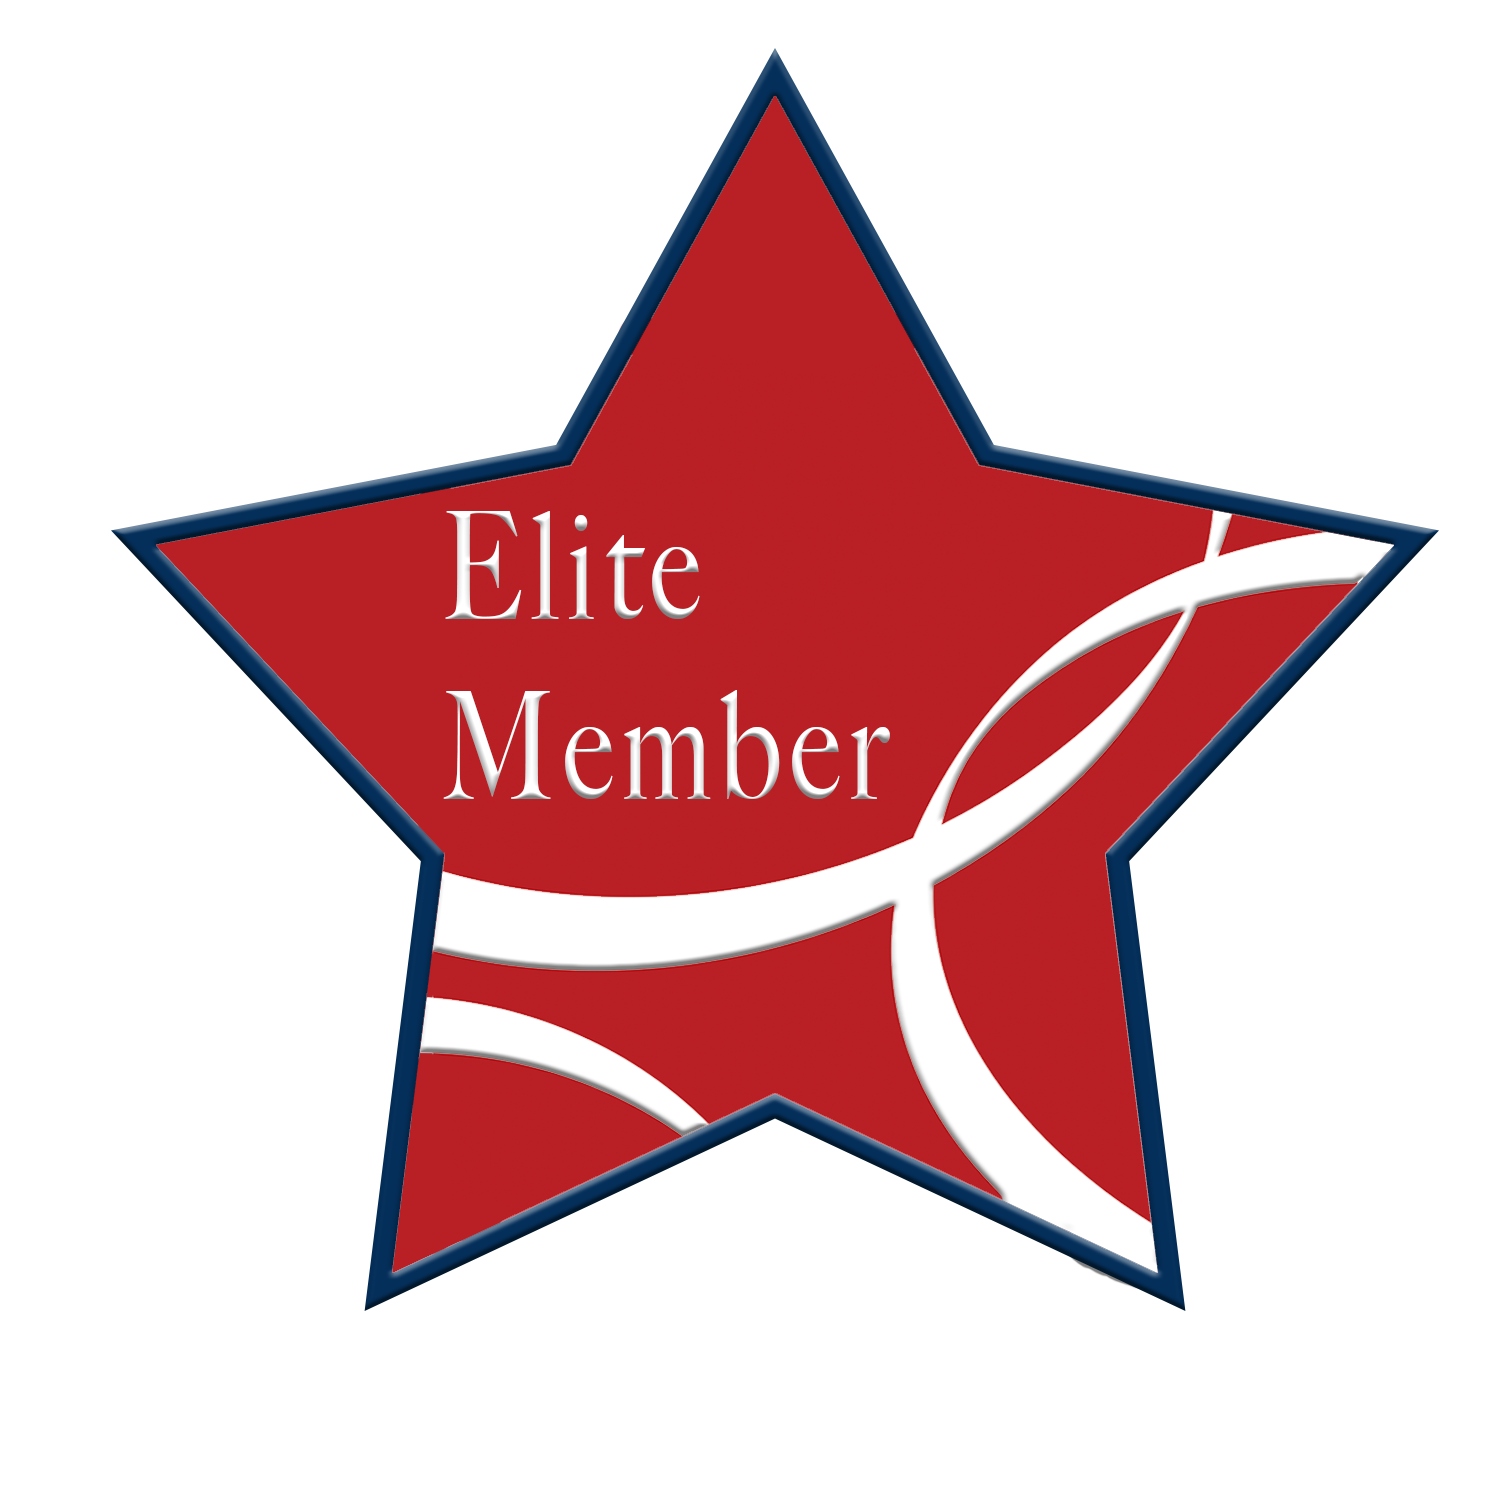 Become an Elite Member